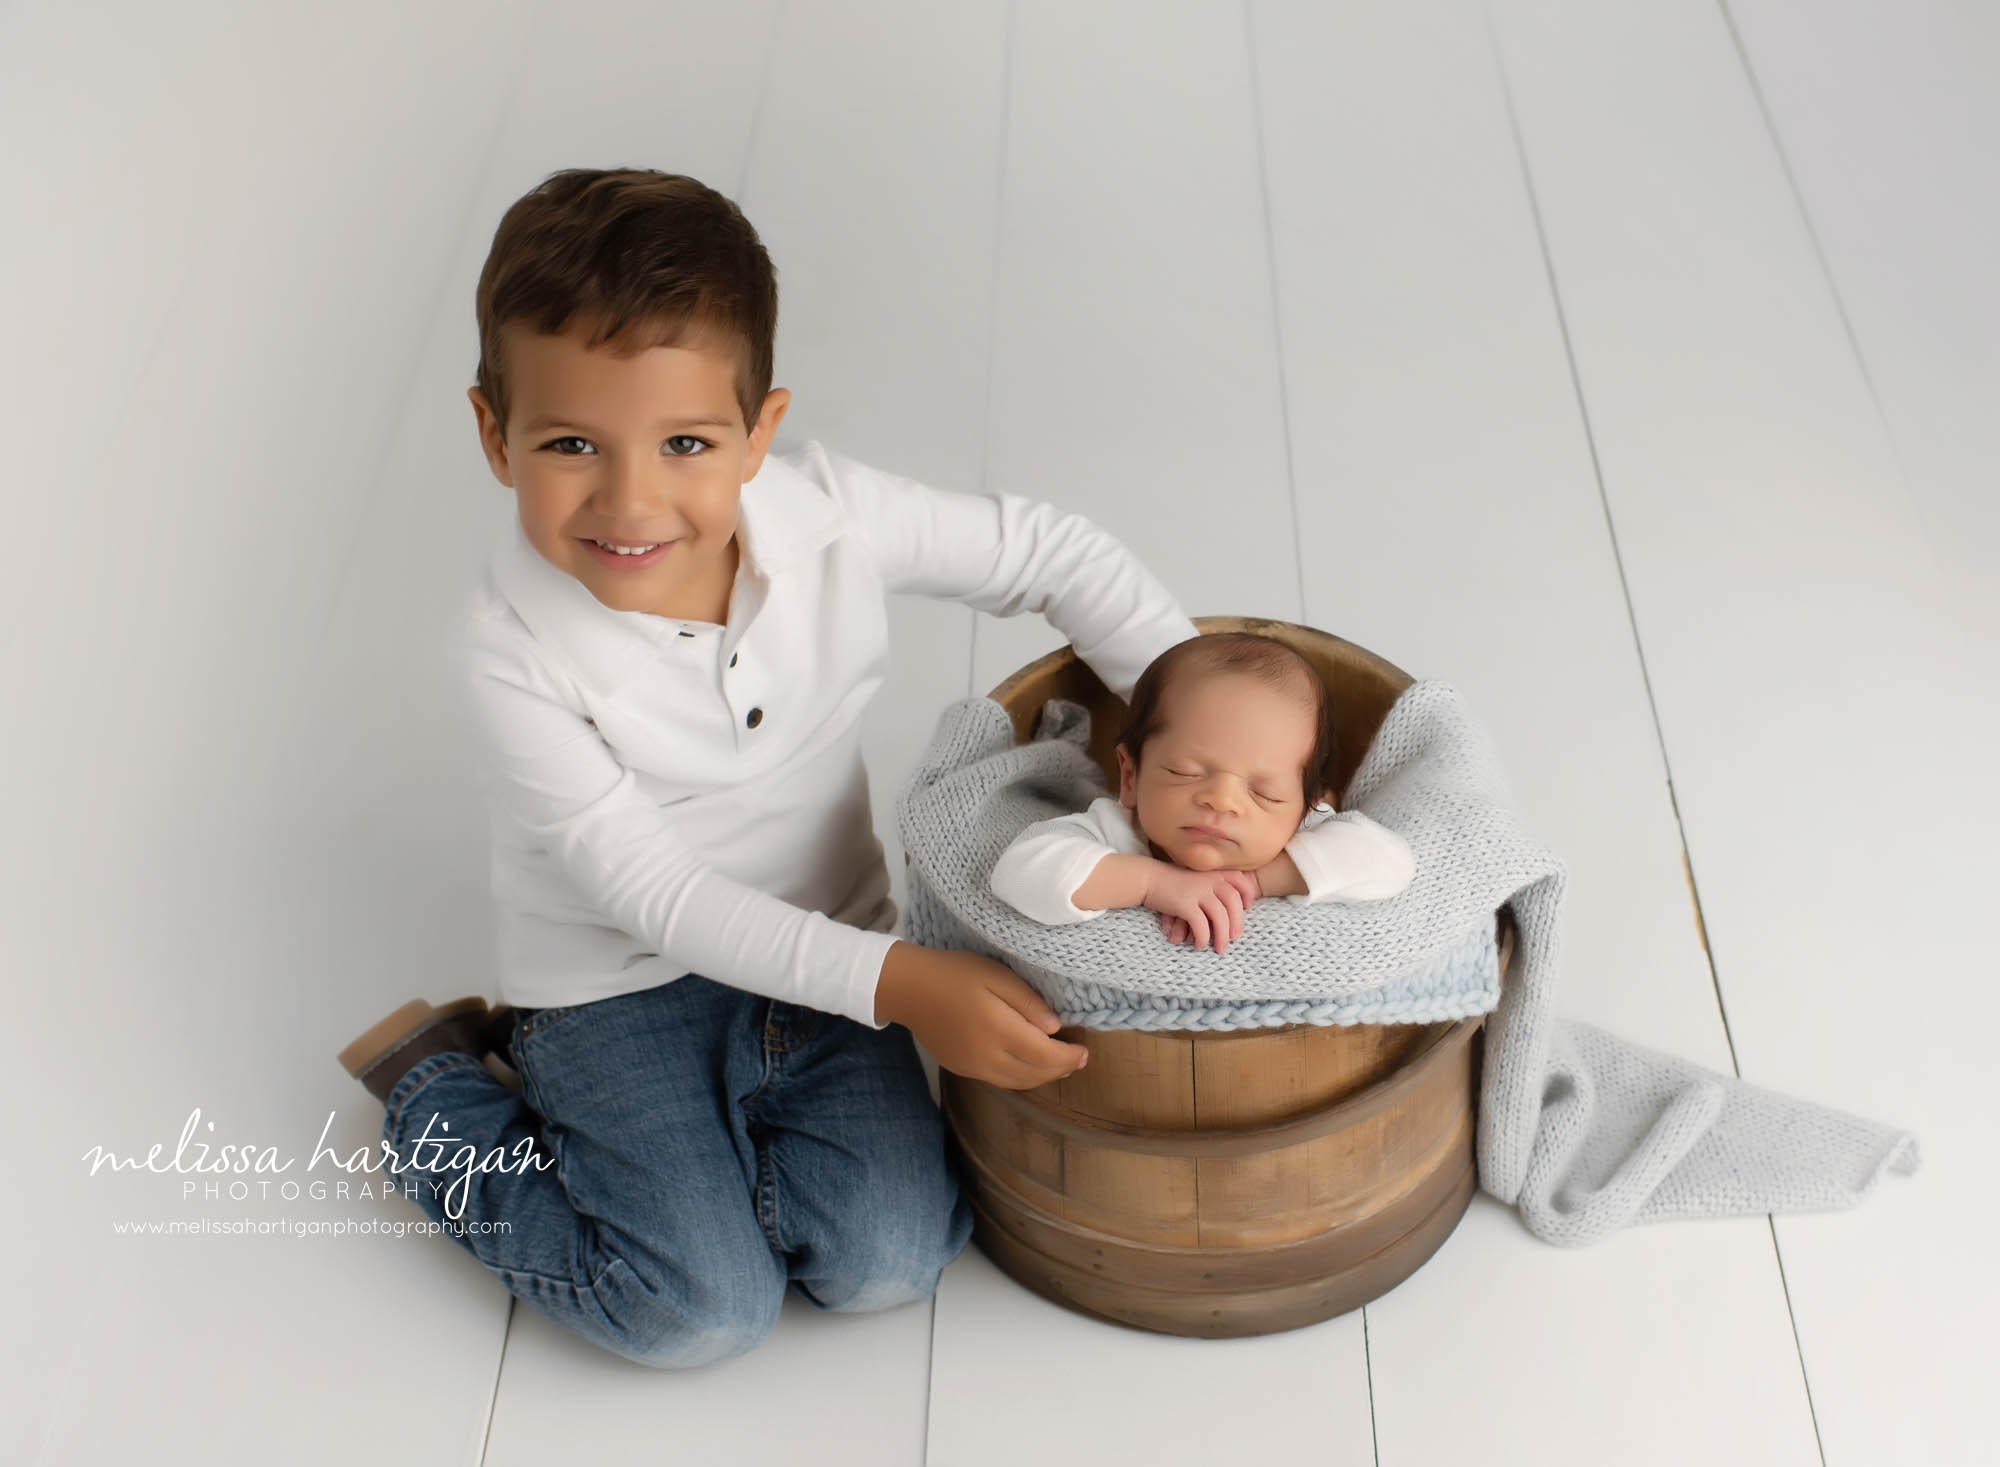 newborn baby boy posed in wooden bucket big brother sitting beside smiling